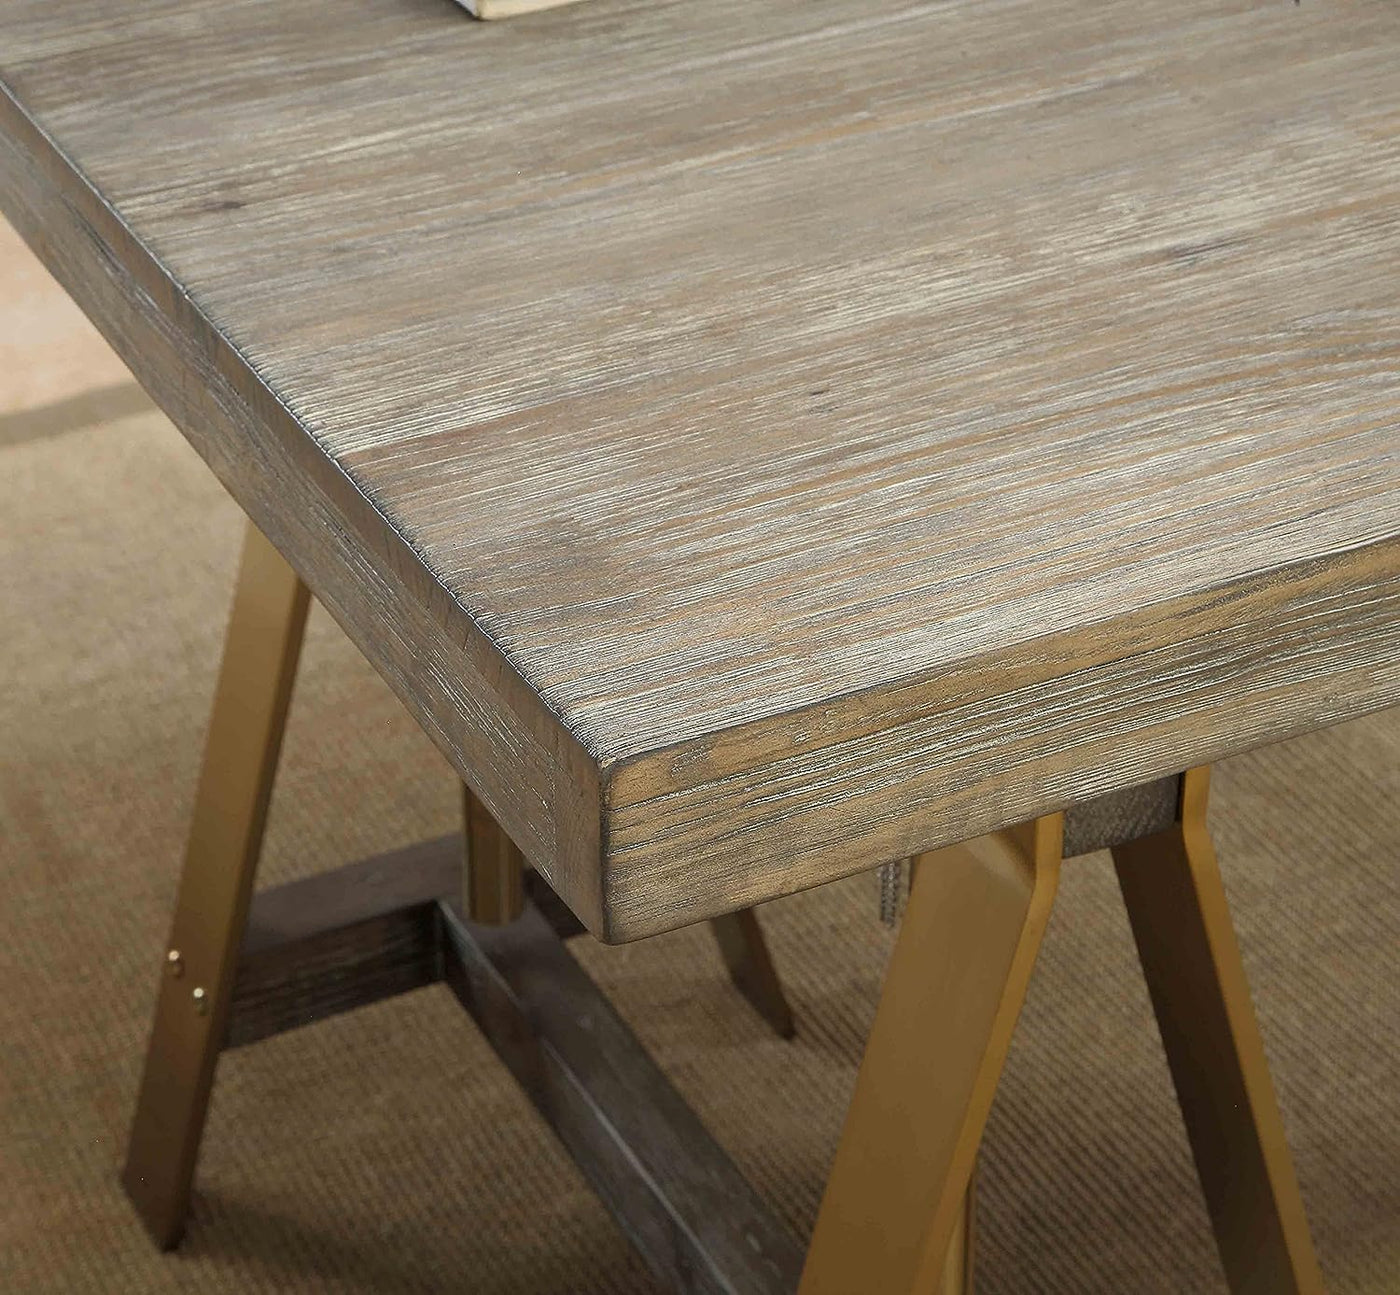 Coast to Coast Imports Biscayne Weathered Adjustable Dining Table/Desk, Brown - $400